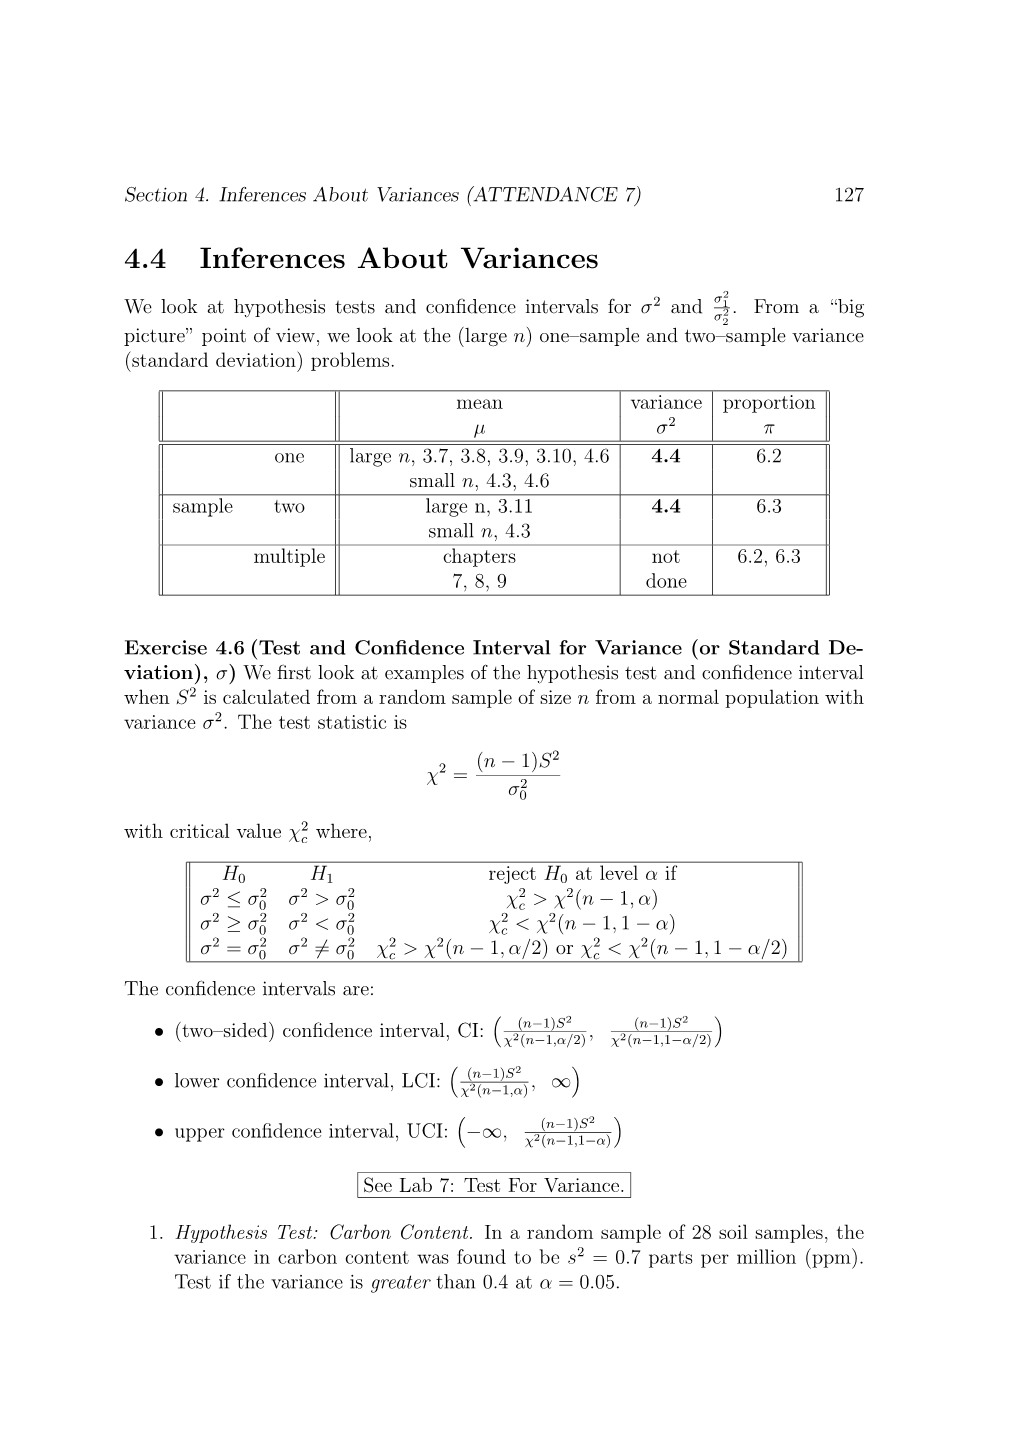 4.4 Inferences About Variances